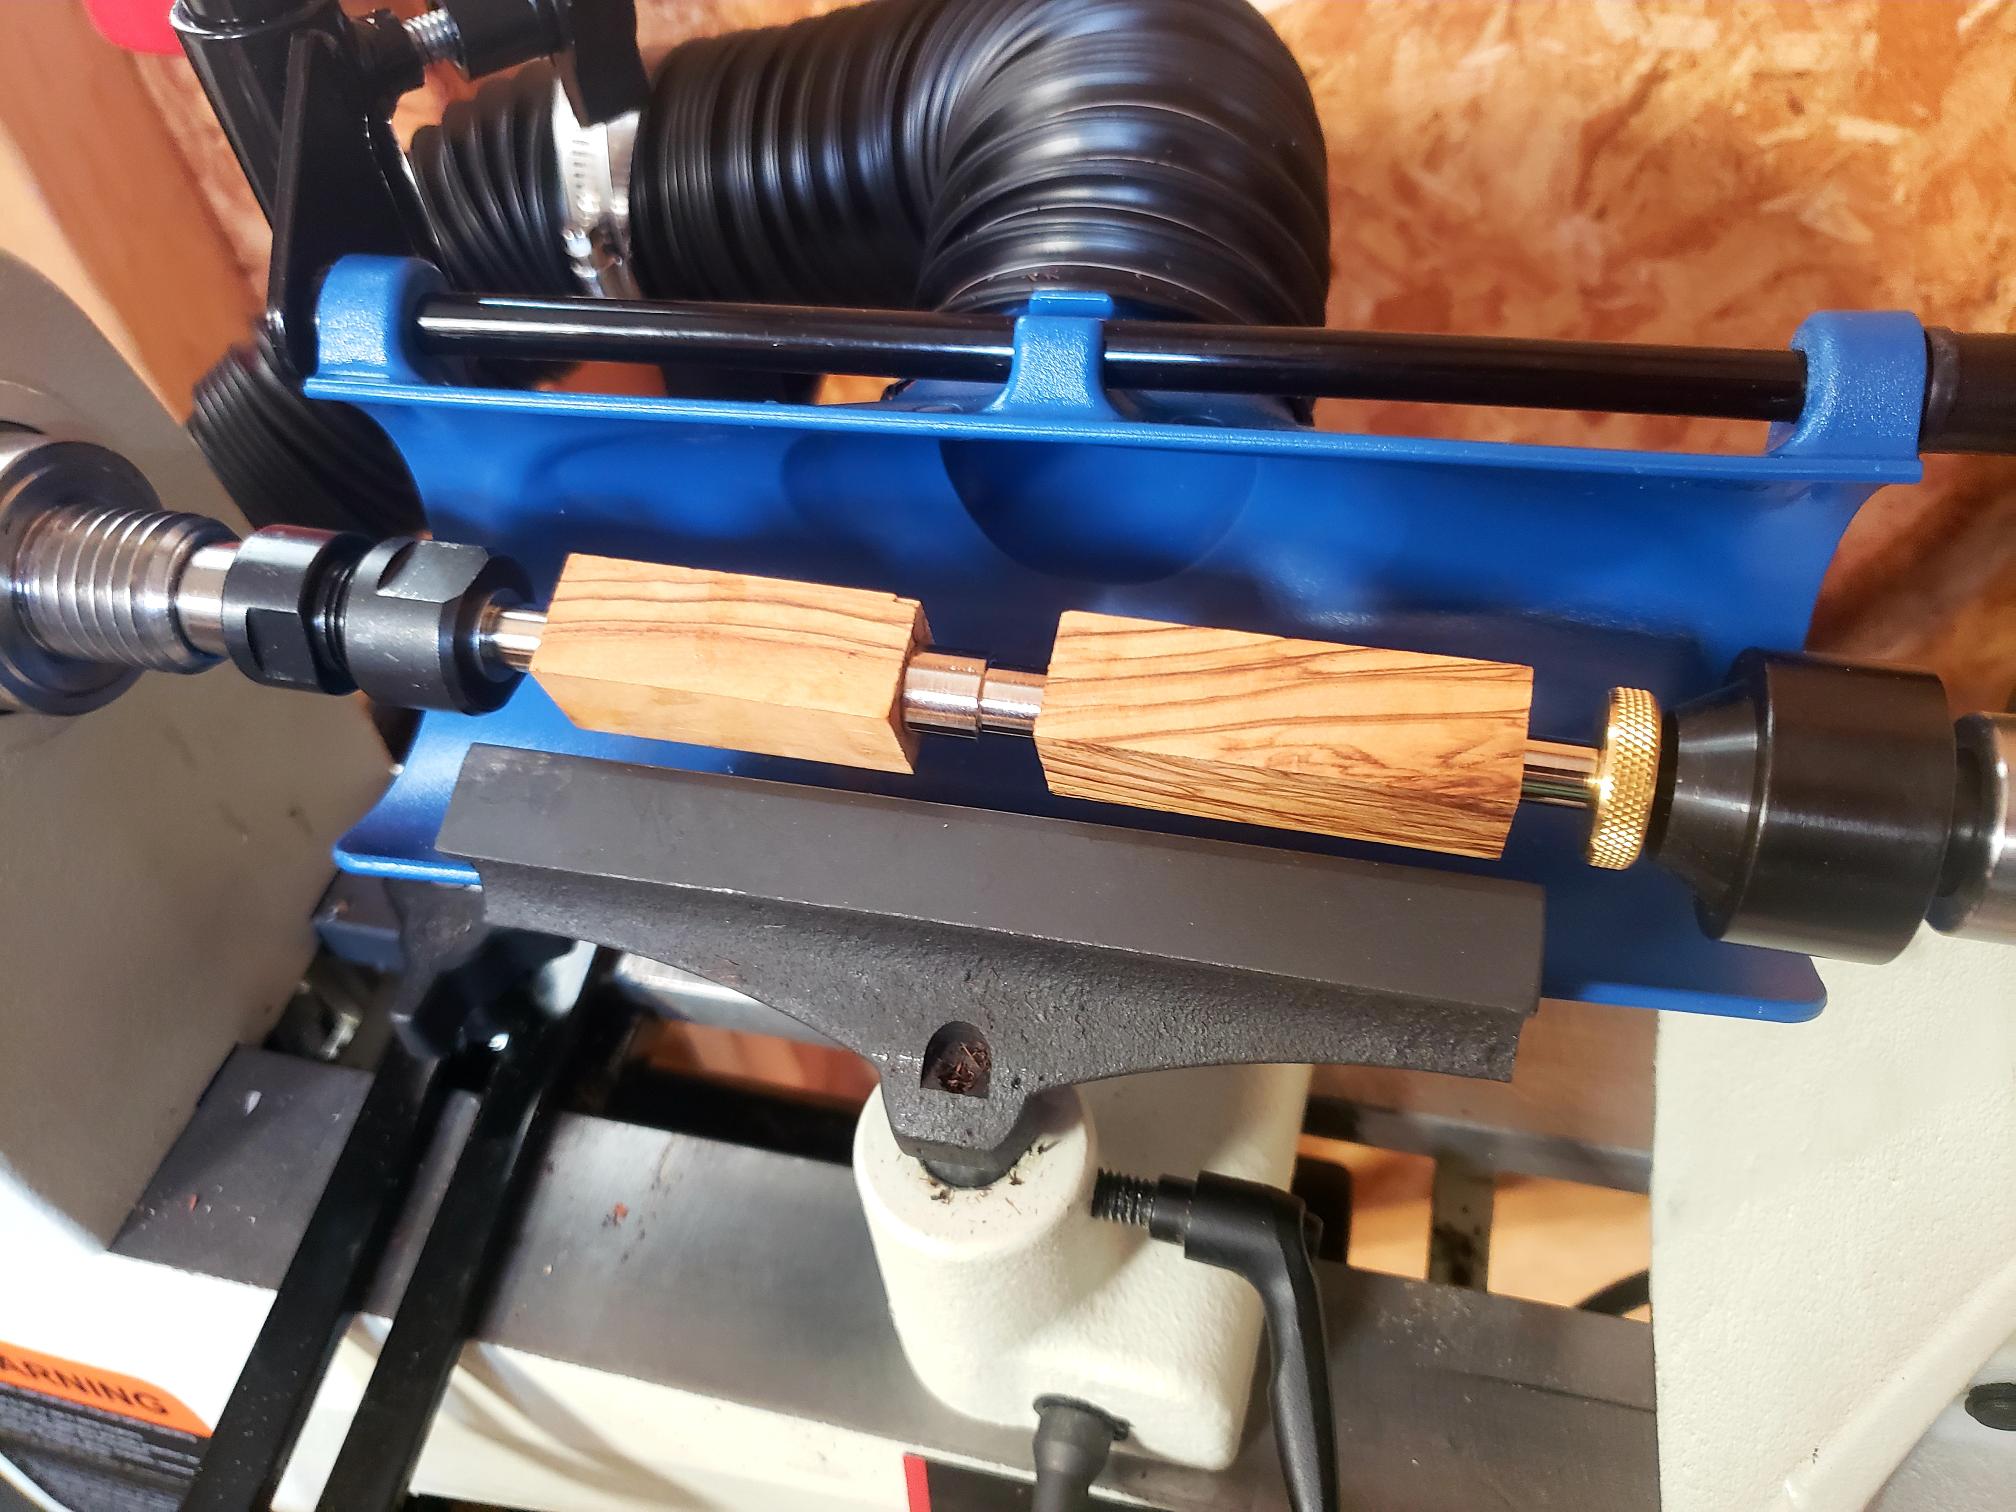 ArkansasCrafts.com tools needed to turn pens on a wood lathe